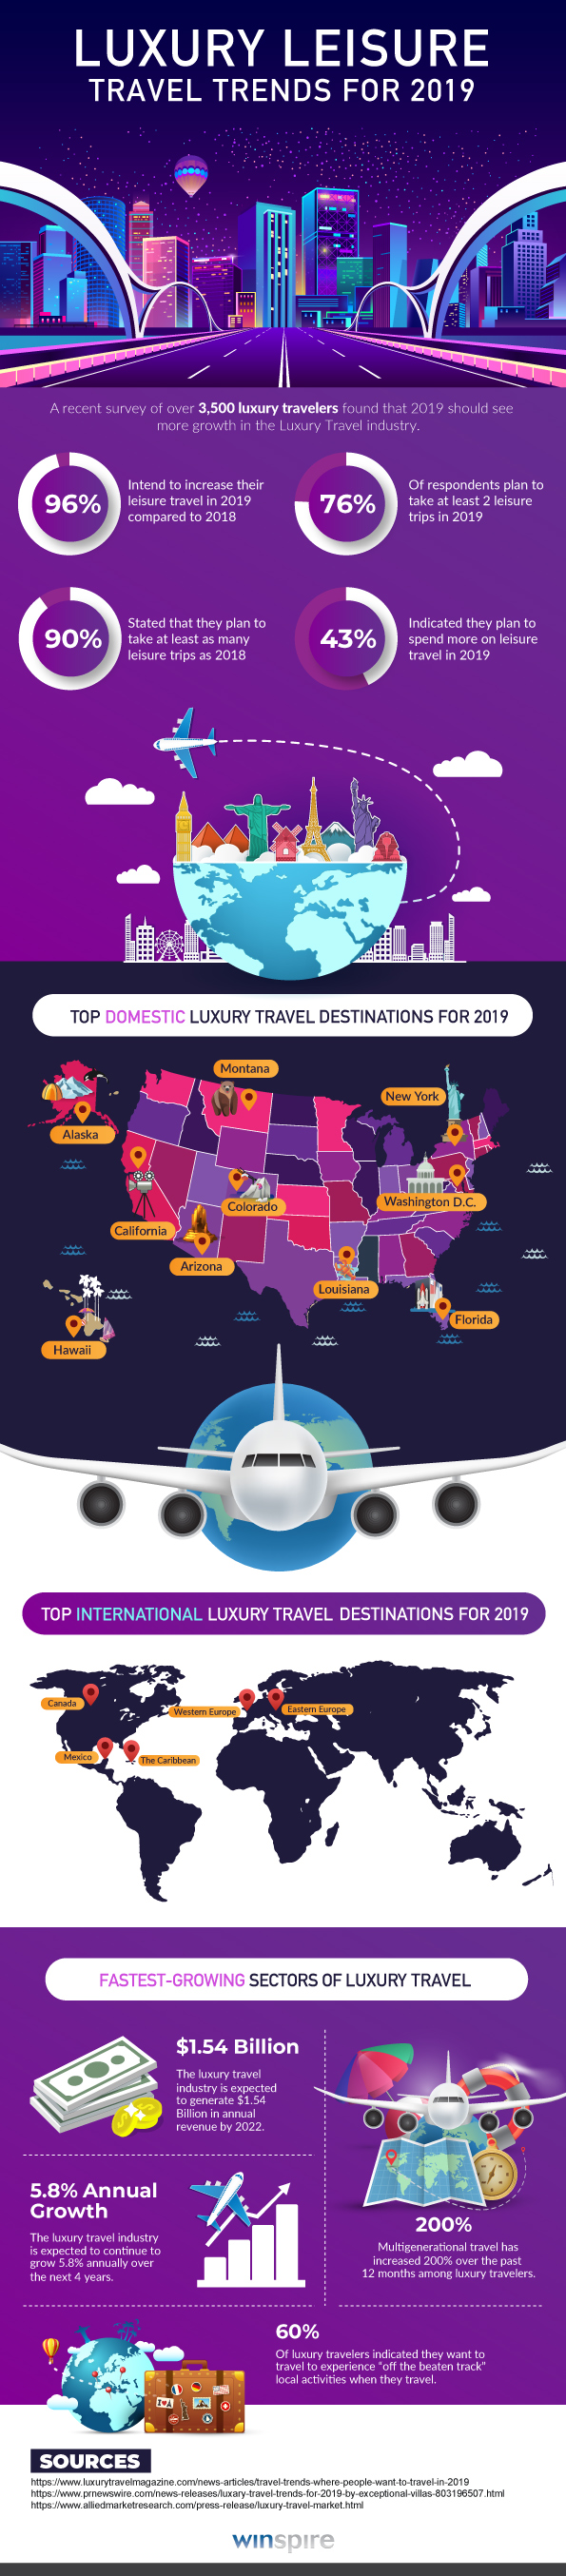 Luxury Leisure Travel Trends for 2019 Infographic